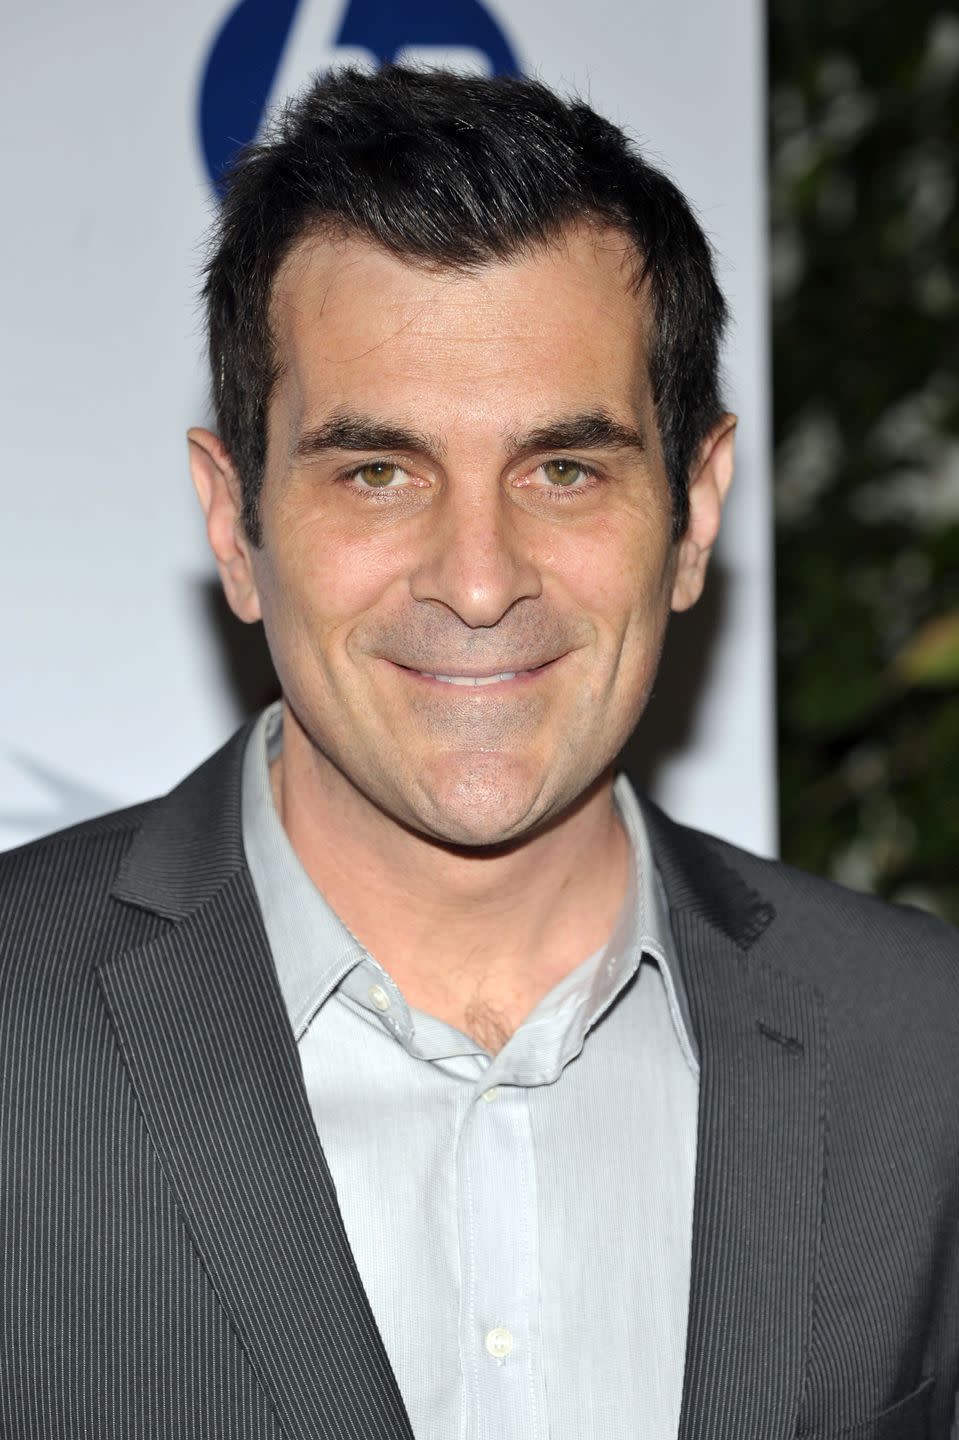 Then: Ty Burrell